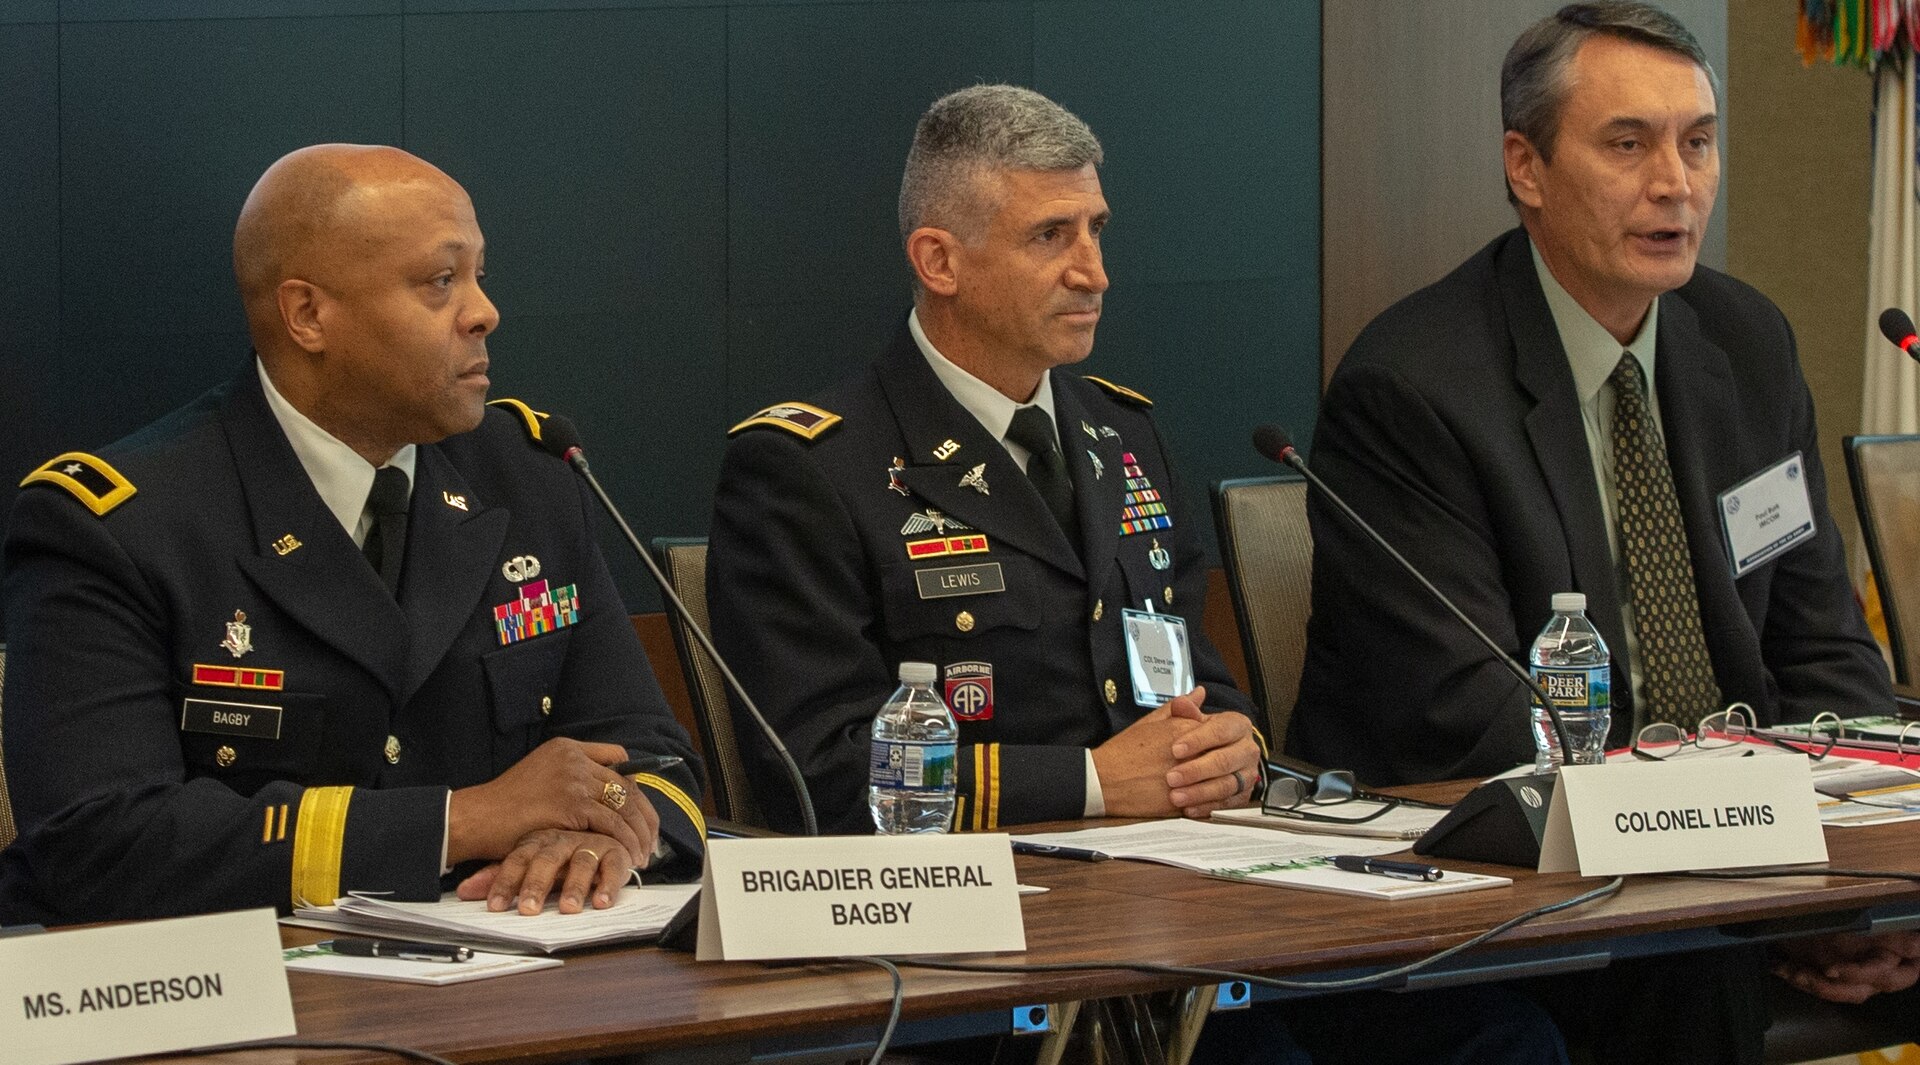 Col. Steve Lewis (center), chief of family programs for the Office of the Assistant Chief of Staff for Installation Management, participates in a panel discussion along with Brig. Gen. Shan K. Bagby, deputy chief of staff for support at the Office of the Surgeon General, and Paul D. Burk, director of G-9 for Army Installation Command, at the Association of the U.S. Army headquarters in Arlington, Virginia June 12. Lewis spoke of the Army Emergency Relief's new program to reimburse spouses up to $2,500 for relicensing expenses.